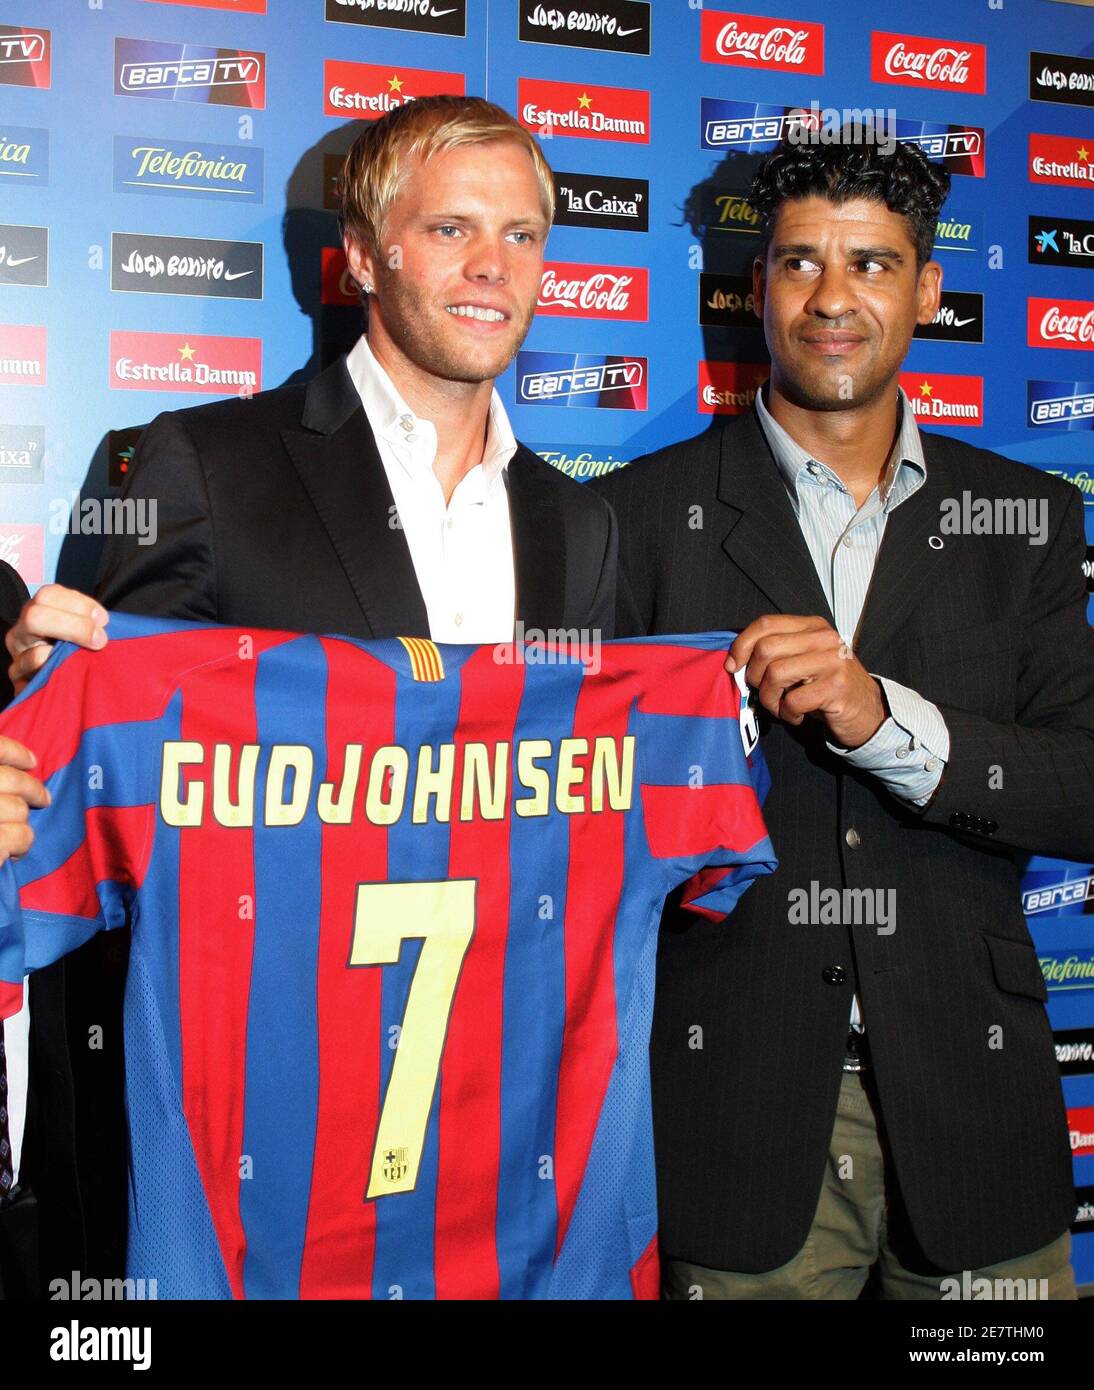 Icelandic striker Eidur Gudjohnsen (L) shows his club jersey with Dutch coach Frank Rijkaard before a news conference at Nou Camp stadium in Barcelona, Spain, June 14, 2006.  Gudjohnsen signed a four-year contract with Barcelona.  REUTERS/Gustau Nacarino (SPAIN) Stock Photo